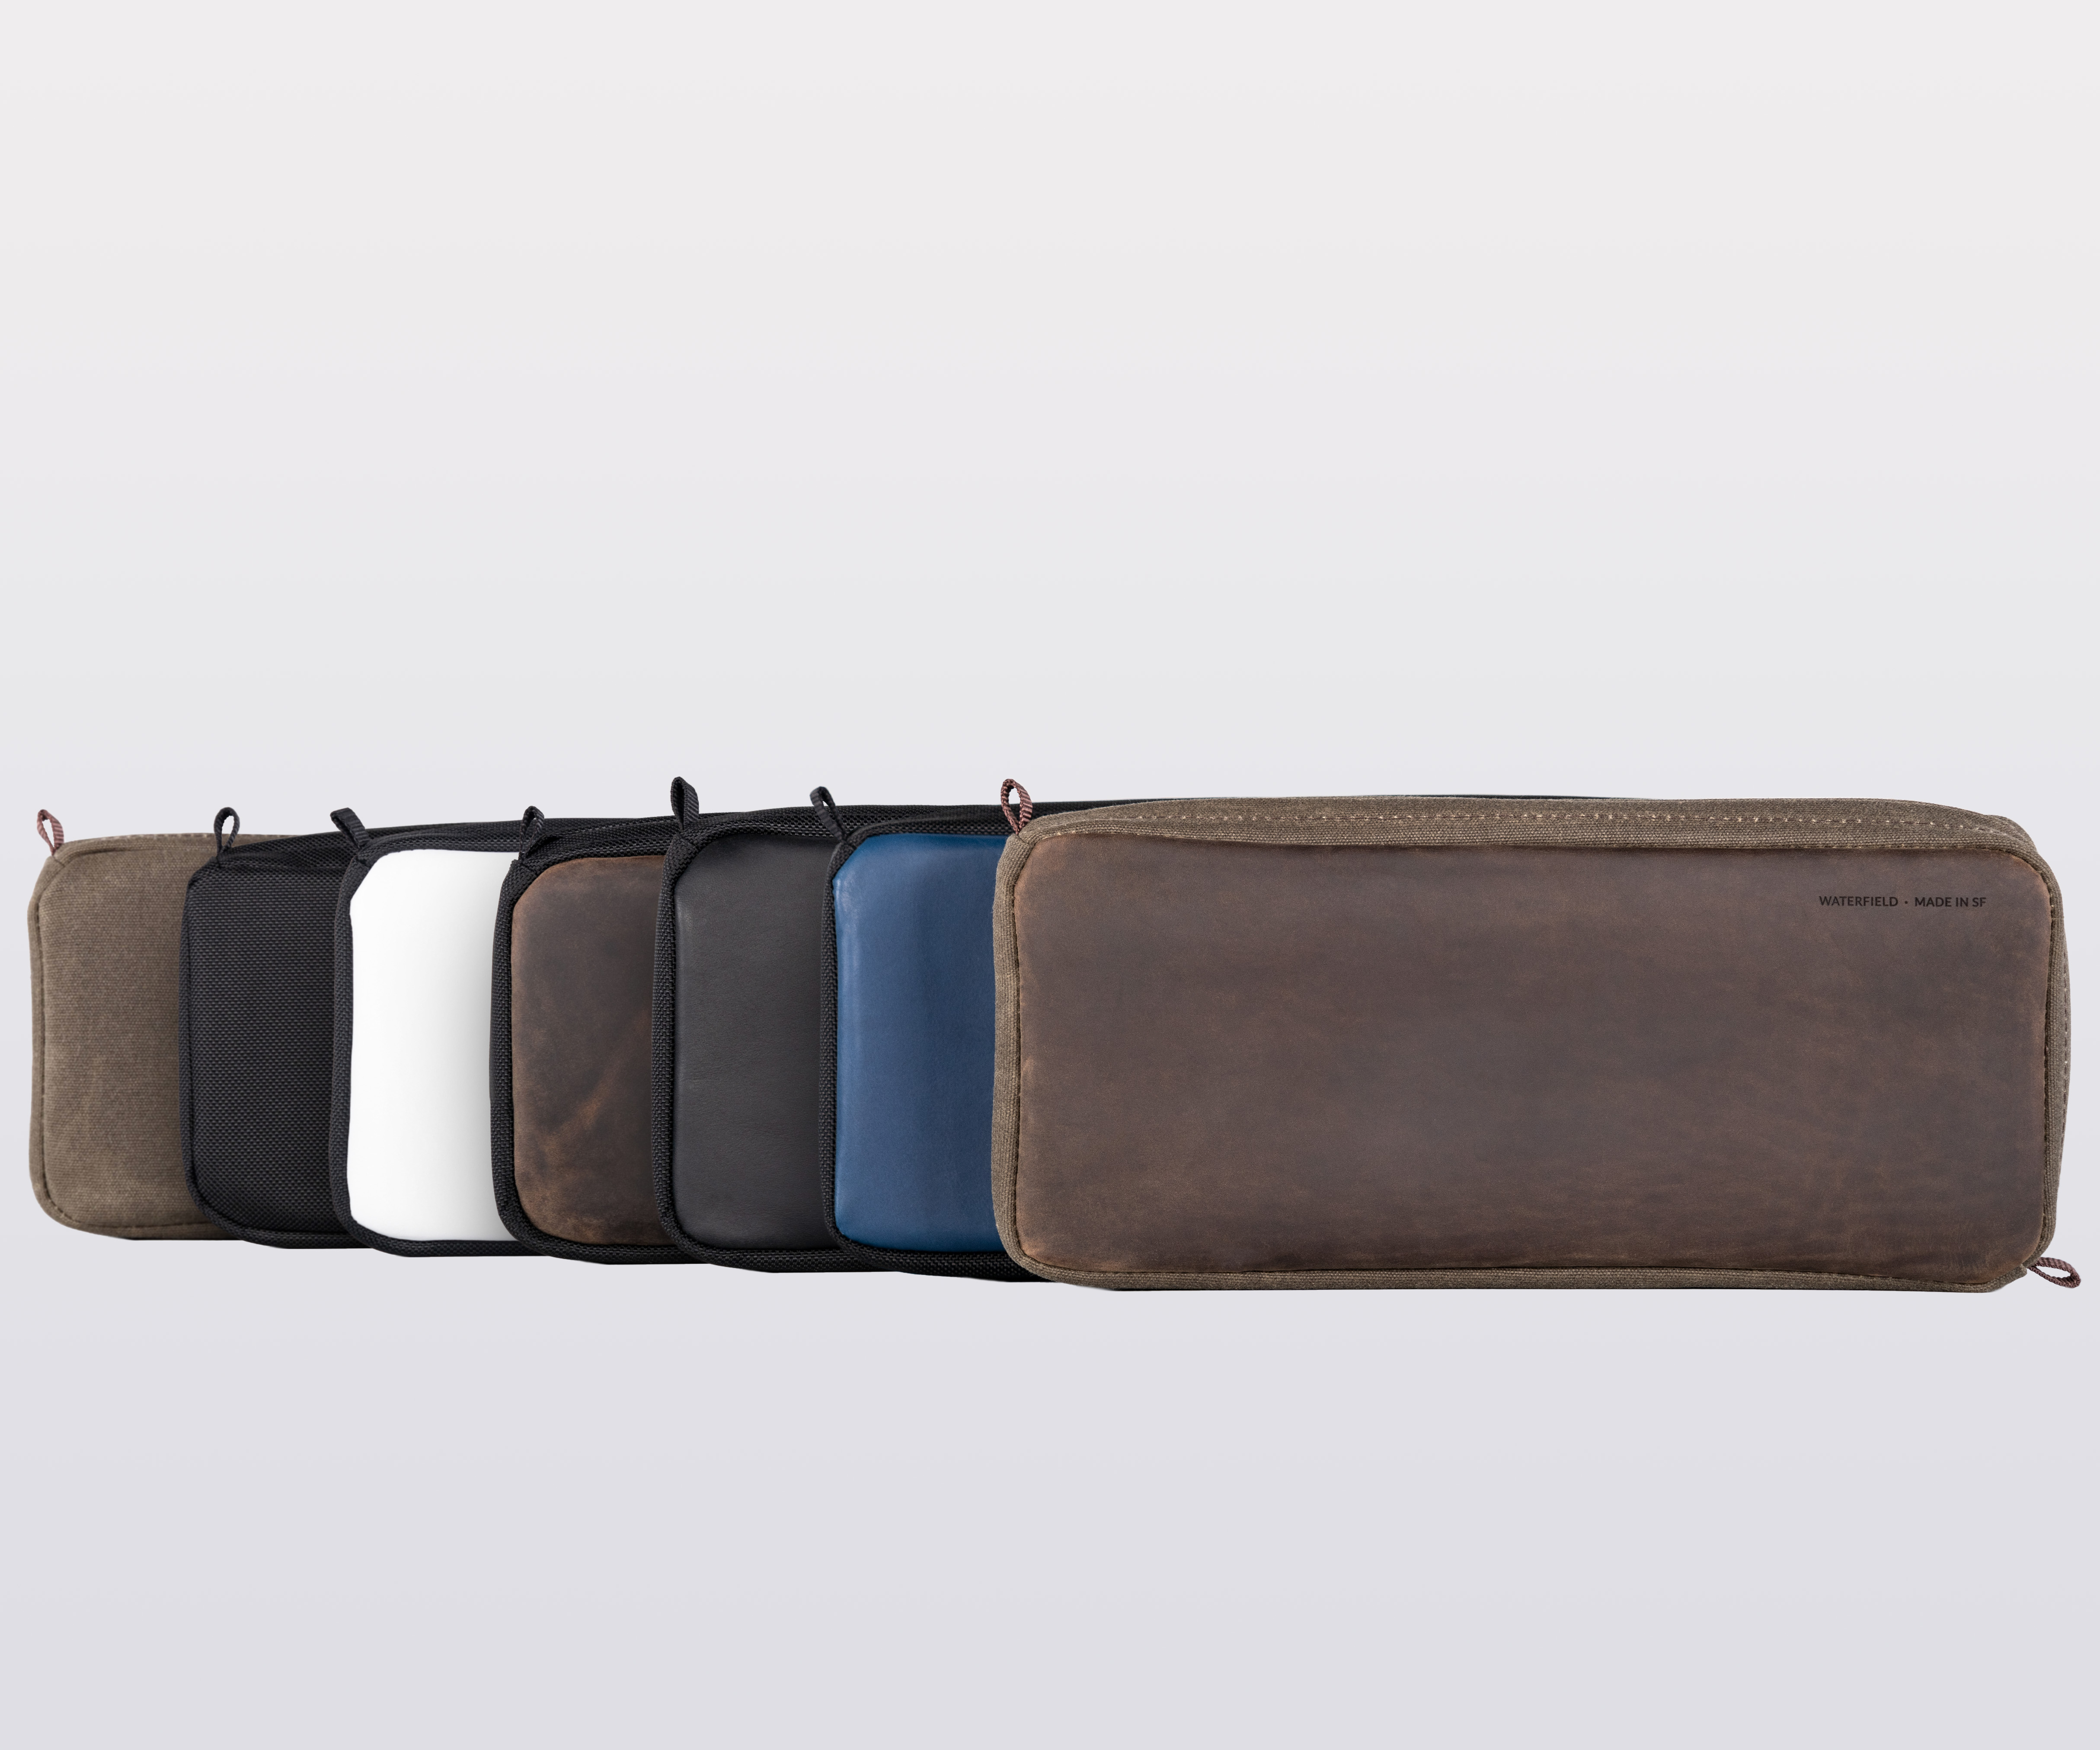 Choice of five leather colors and two vegan textiles.